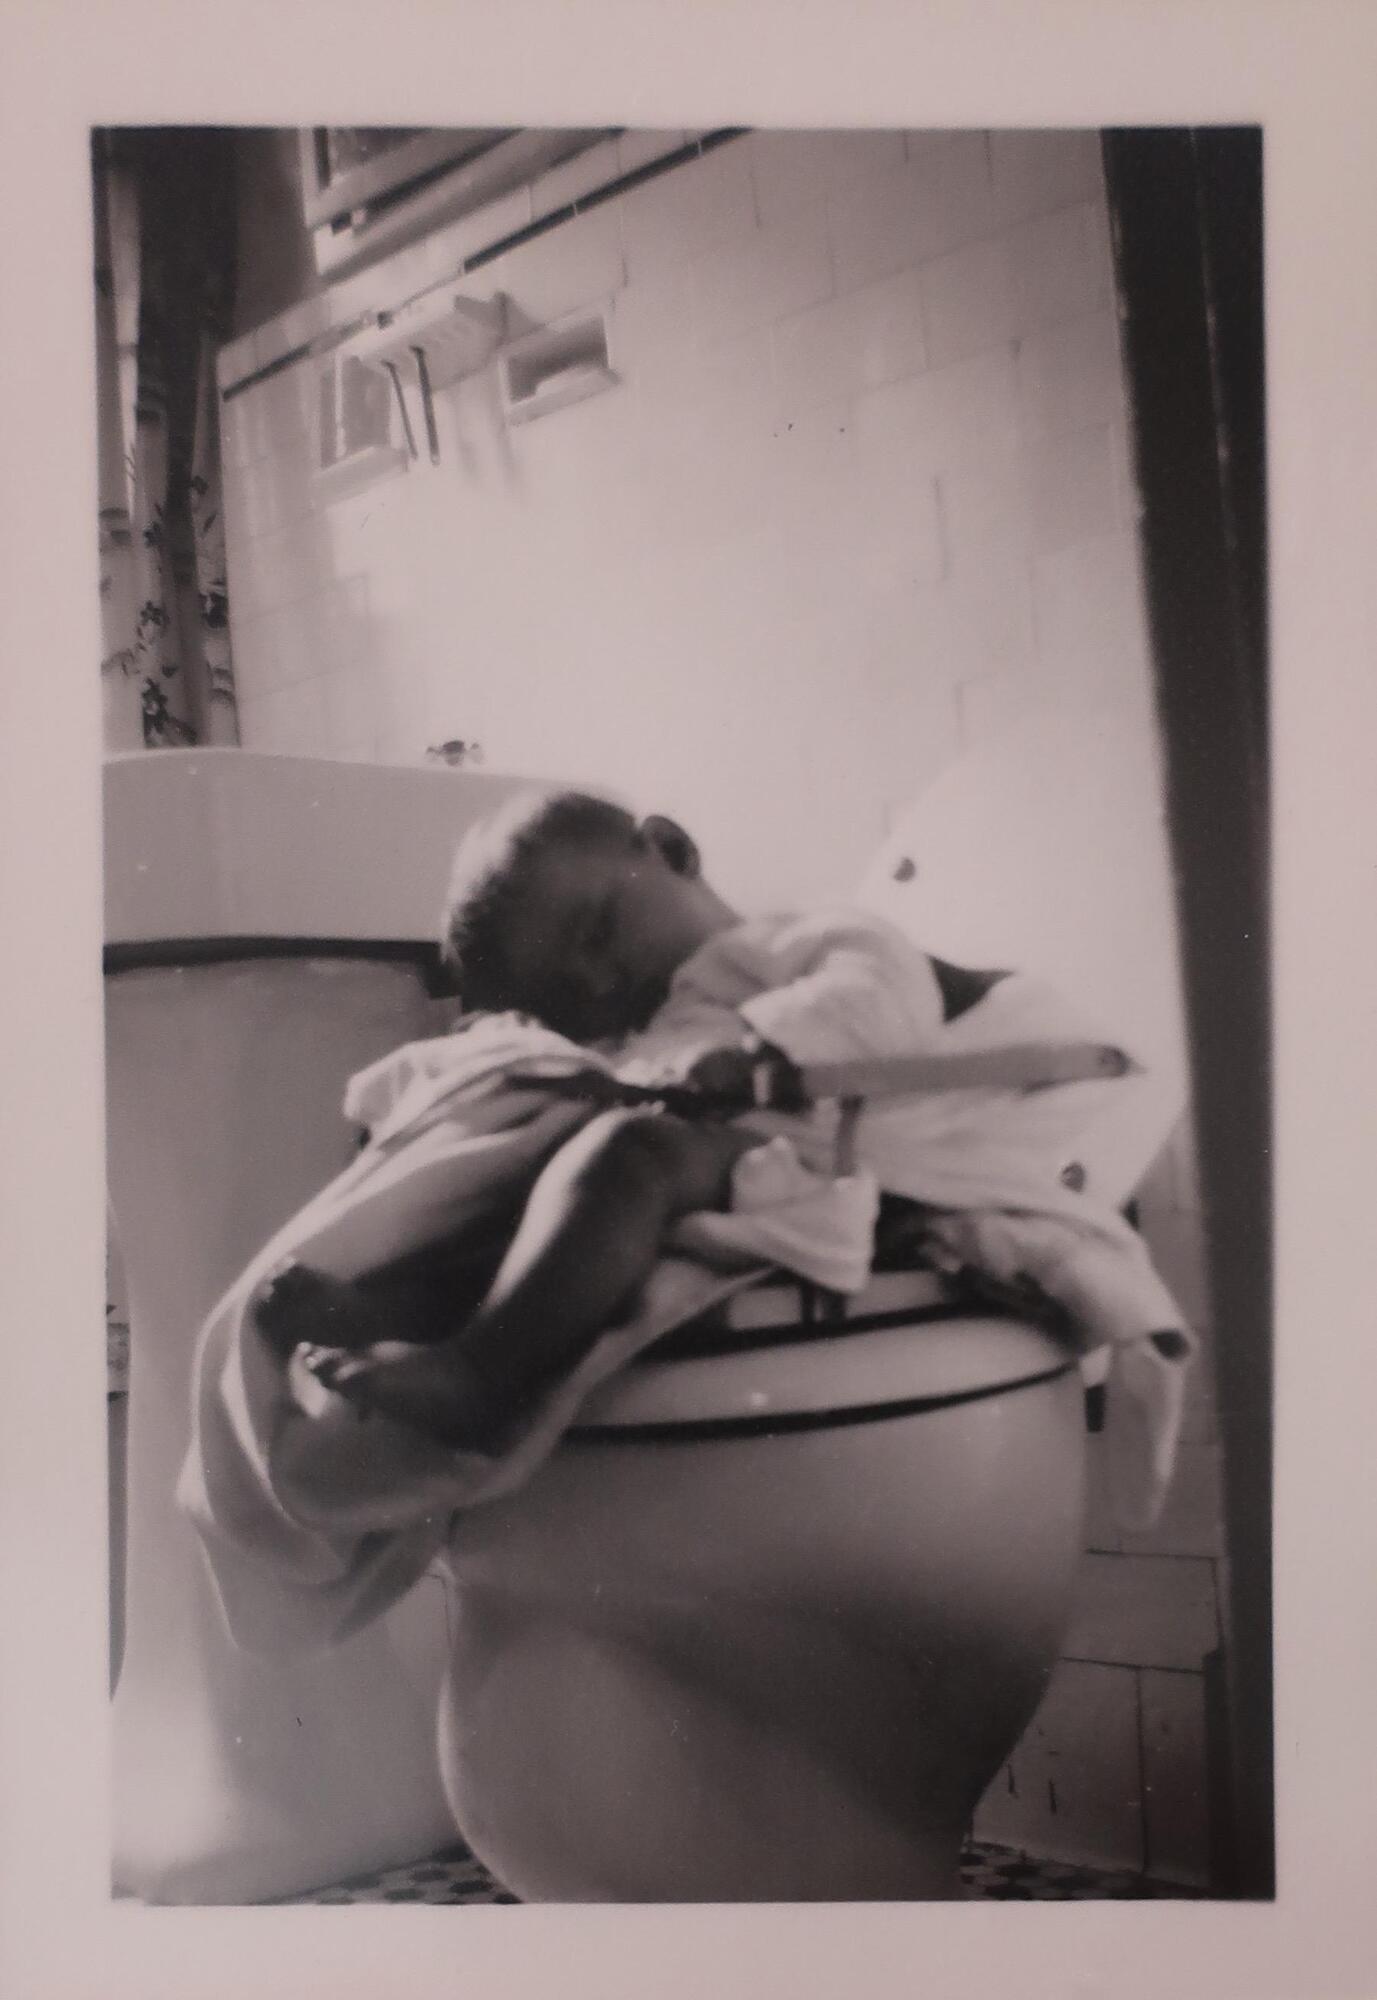 <span style="font-size:12pt"><span calibri="" style="font-family:">A small child sleeping in a chair on what appears to be the lid of a toilet. The child has blankets around them and is leaning over to the left. There is white tile and a wall-mounted toothbrush holder visible in the background.</span></span><br />
&nbsp;